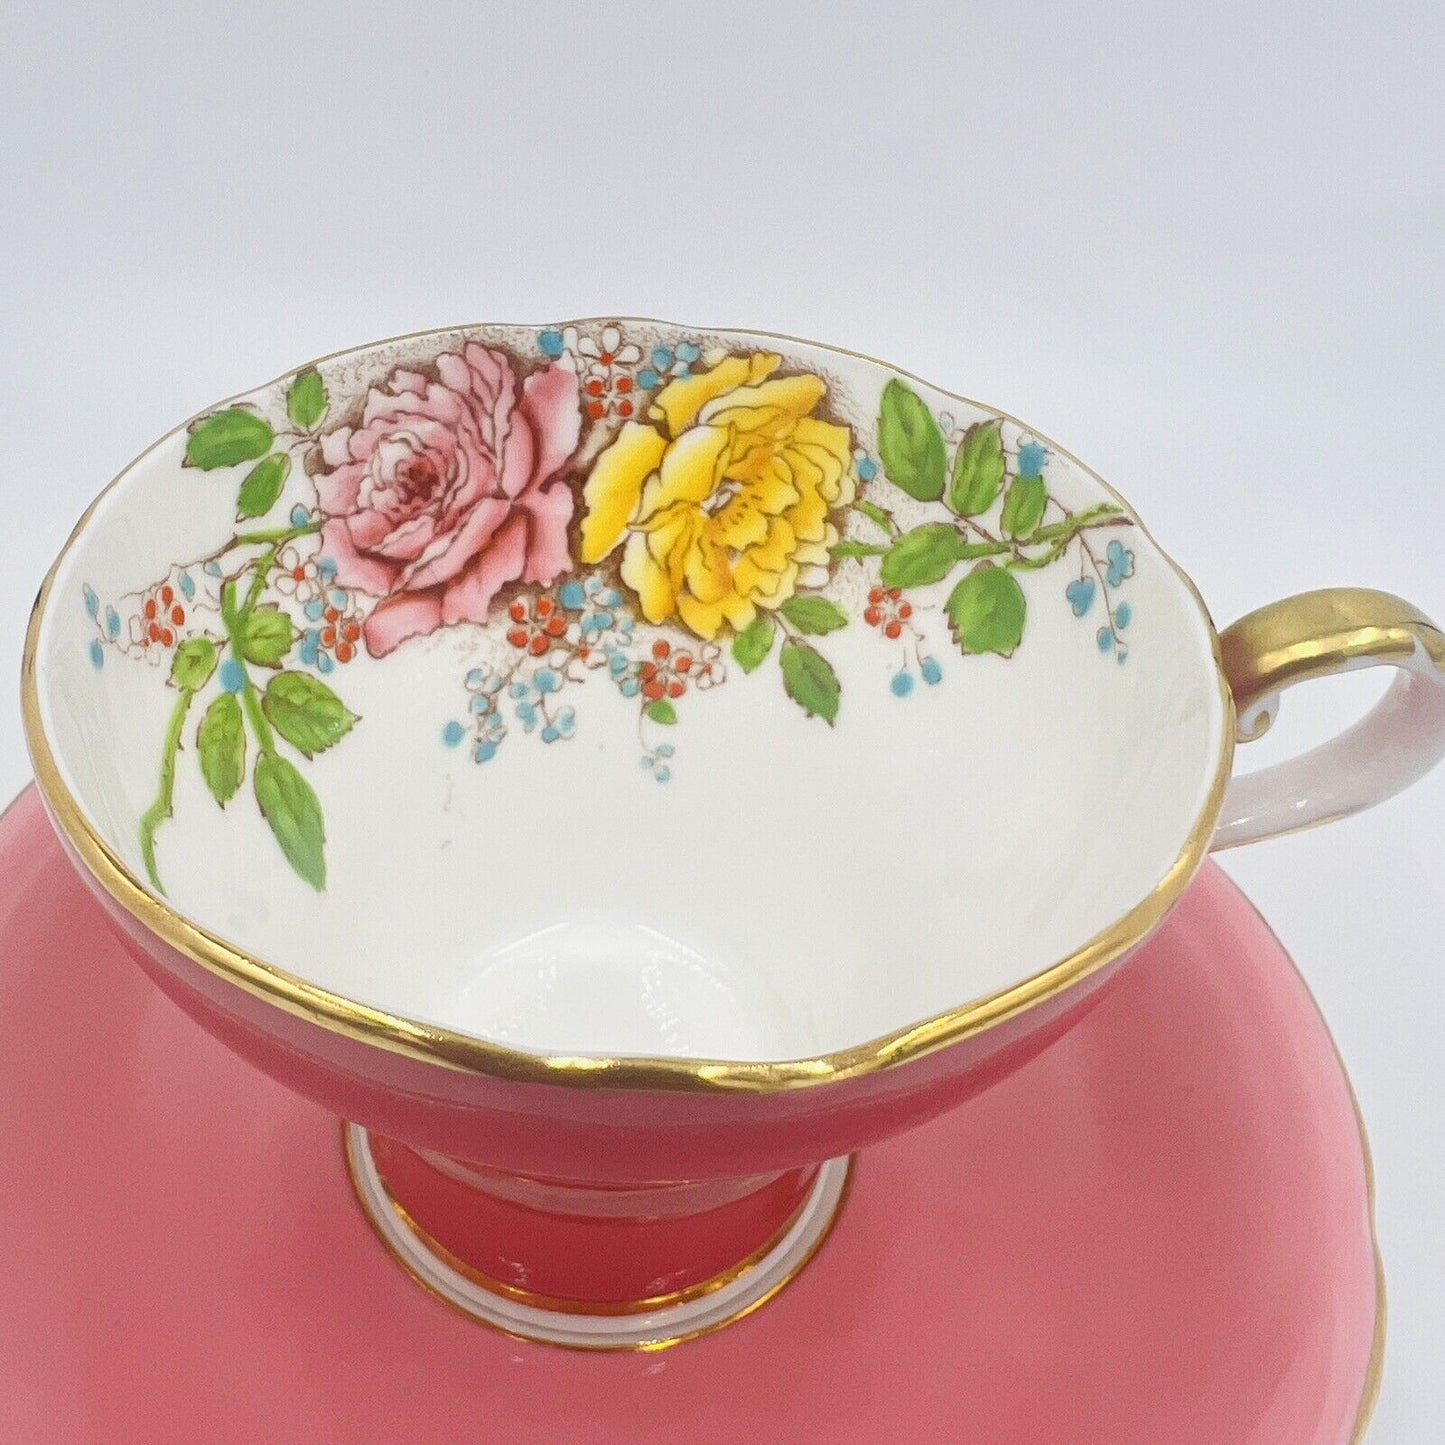 Aynsley Tea Cup & Saucer Cabbage Rose Pink Bone China Set T5025 Hand-painted